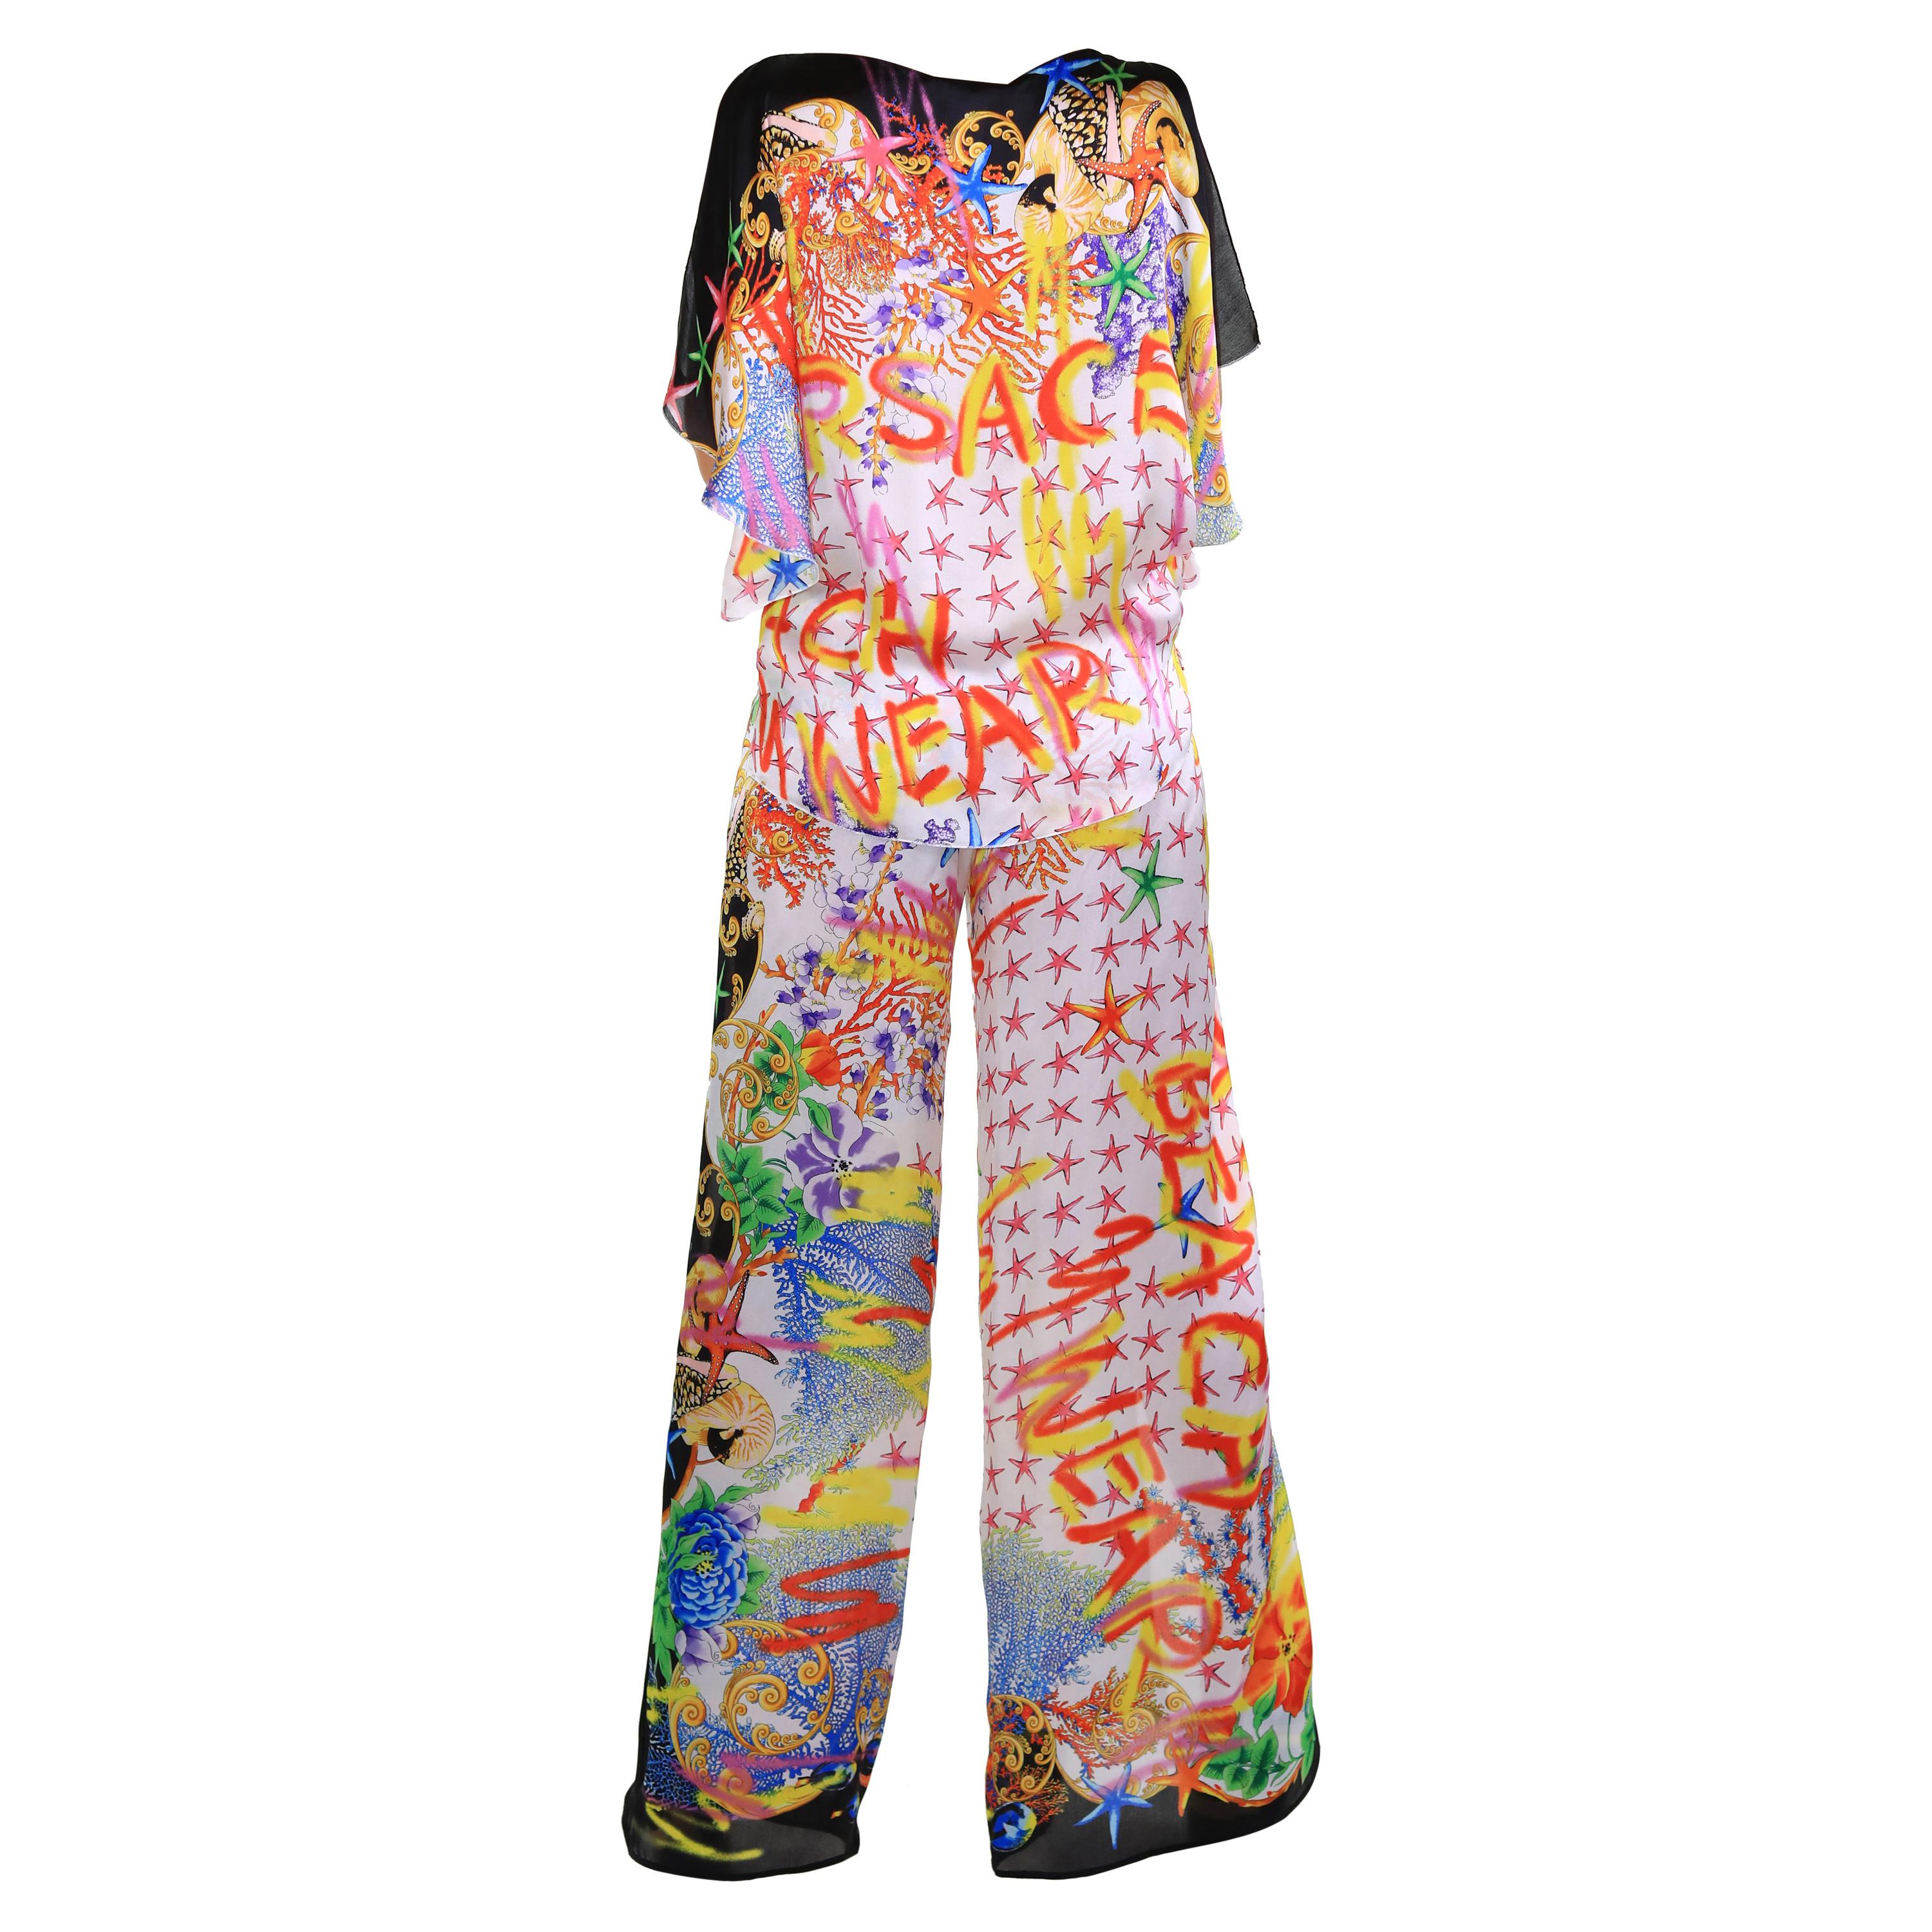 NEW VERSACE SEASHELL and GRAFFITI PRINT 100% SILK PANT SUIT Size 38 For Sale